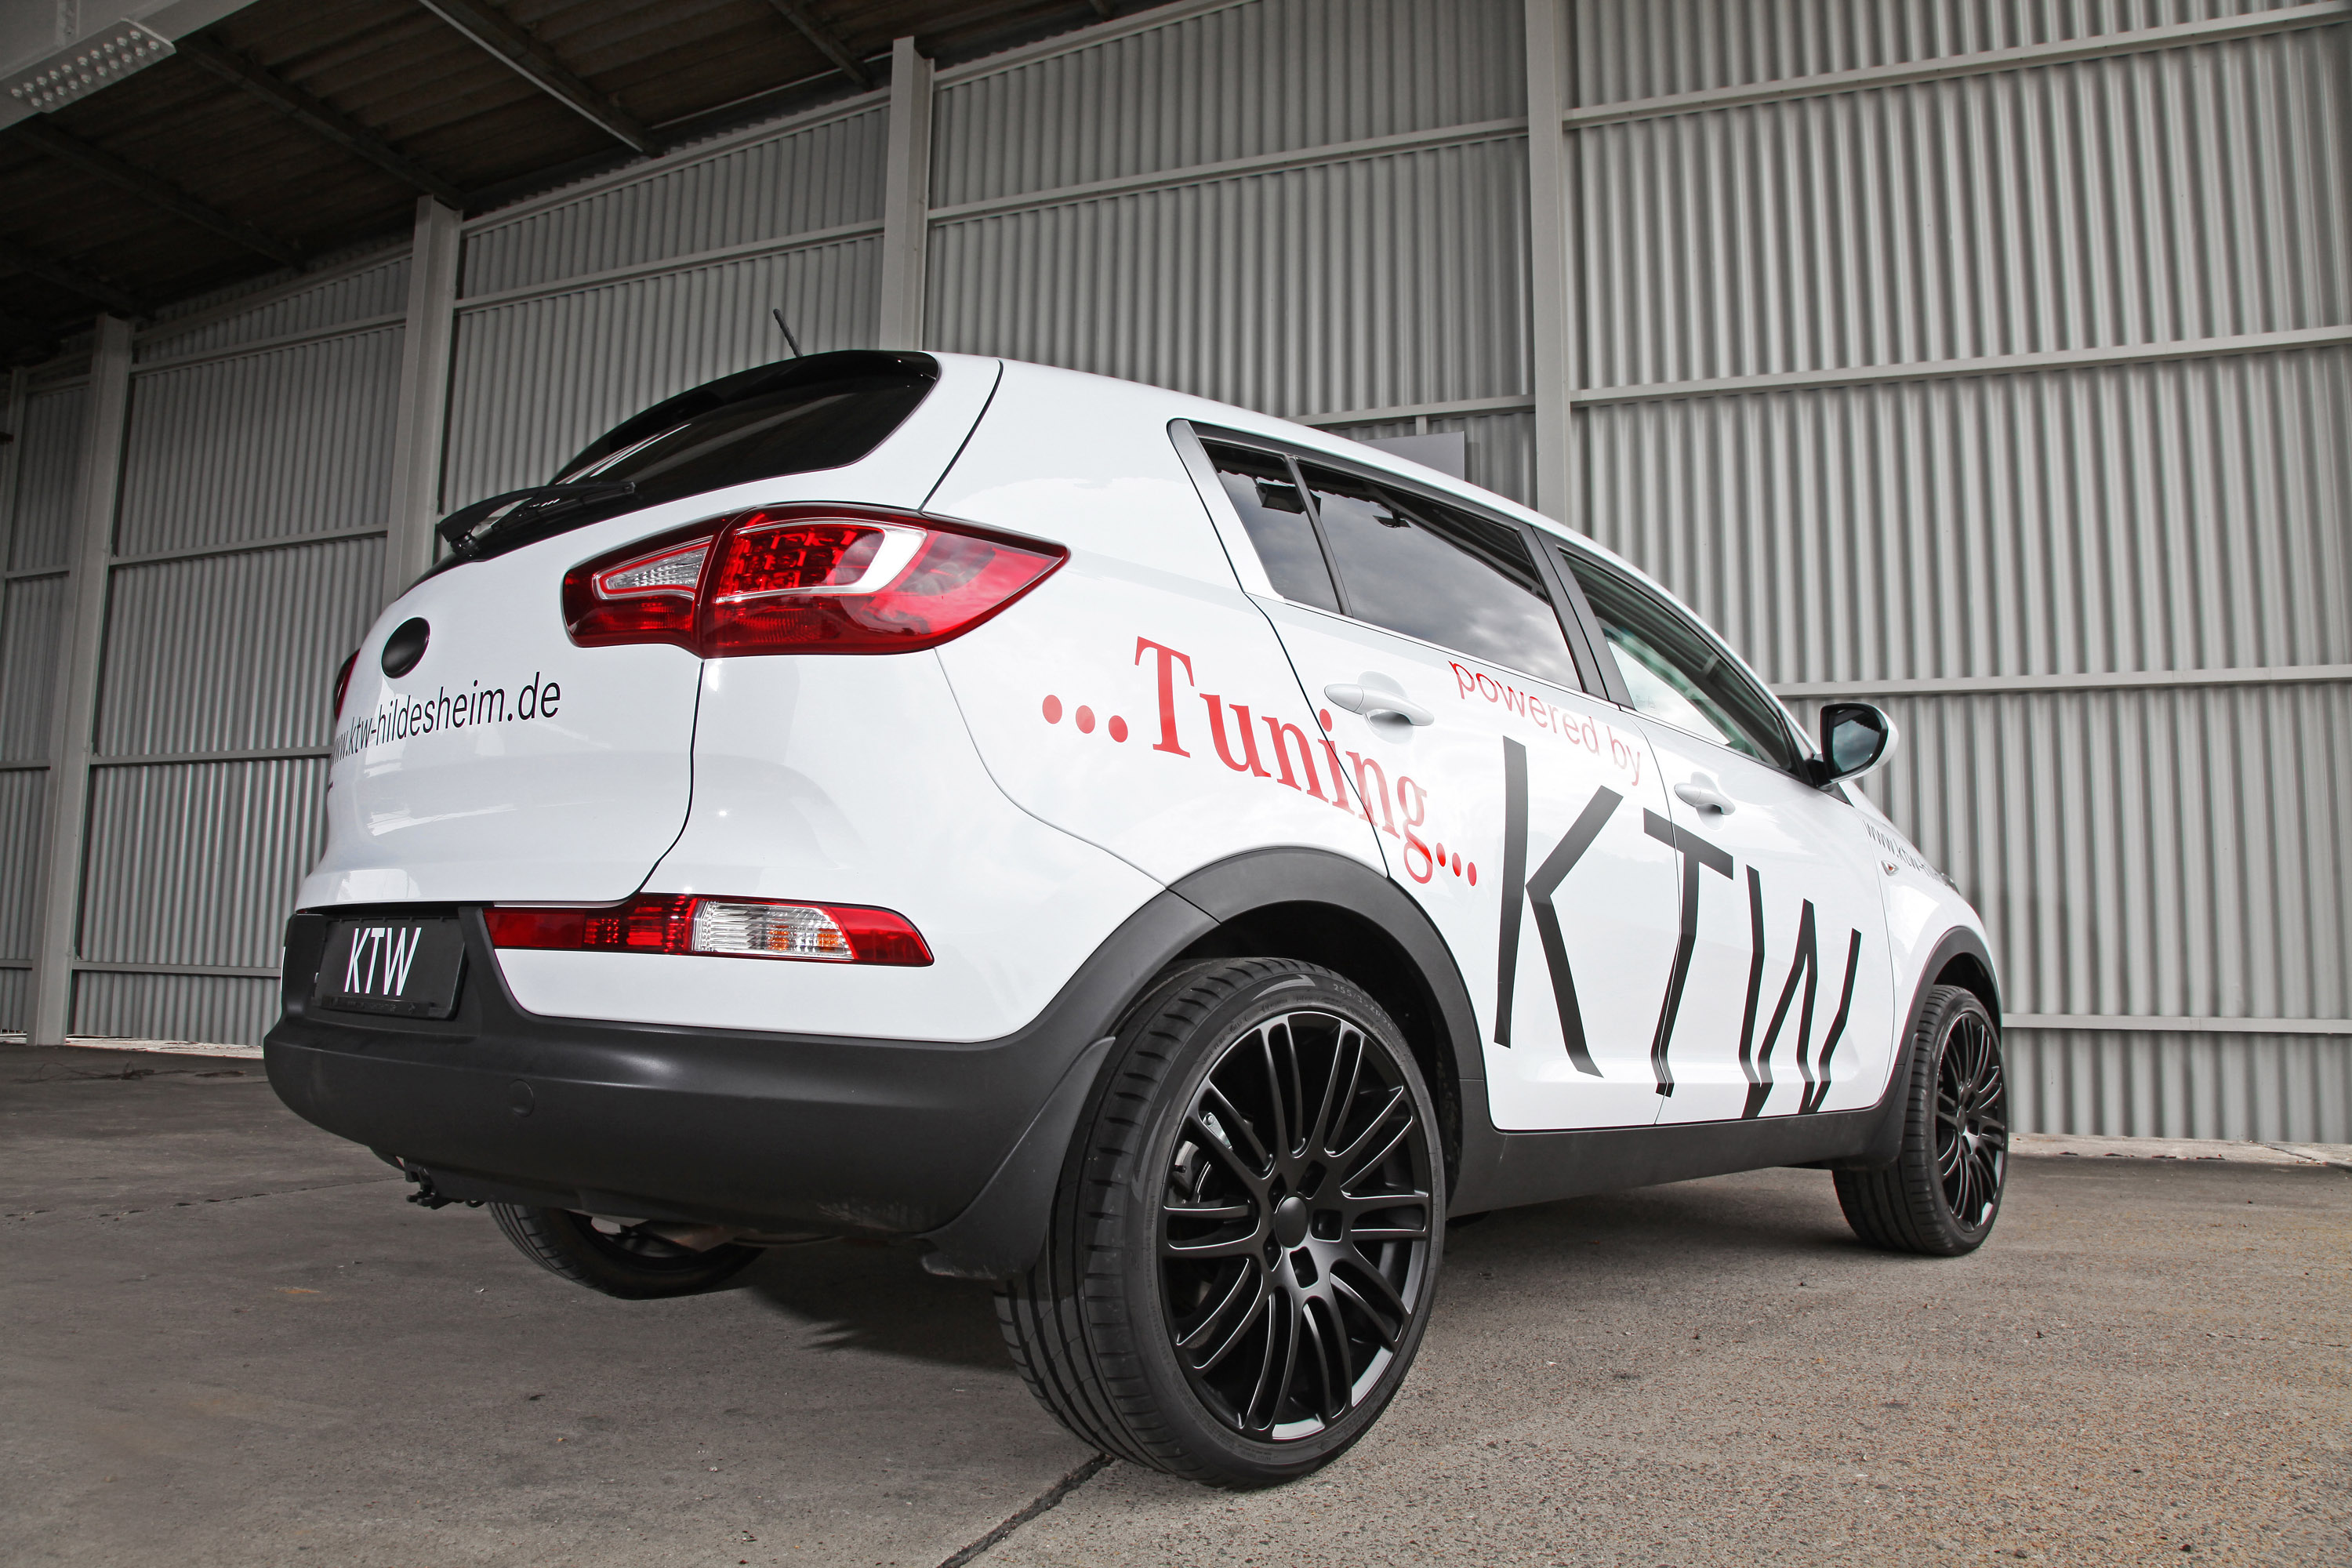 KTW Tuning Gives New Look To Kia Sportage